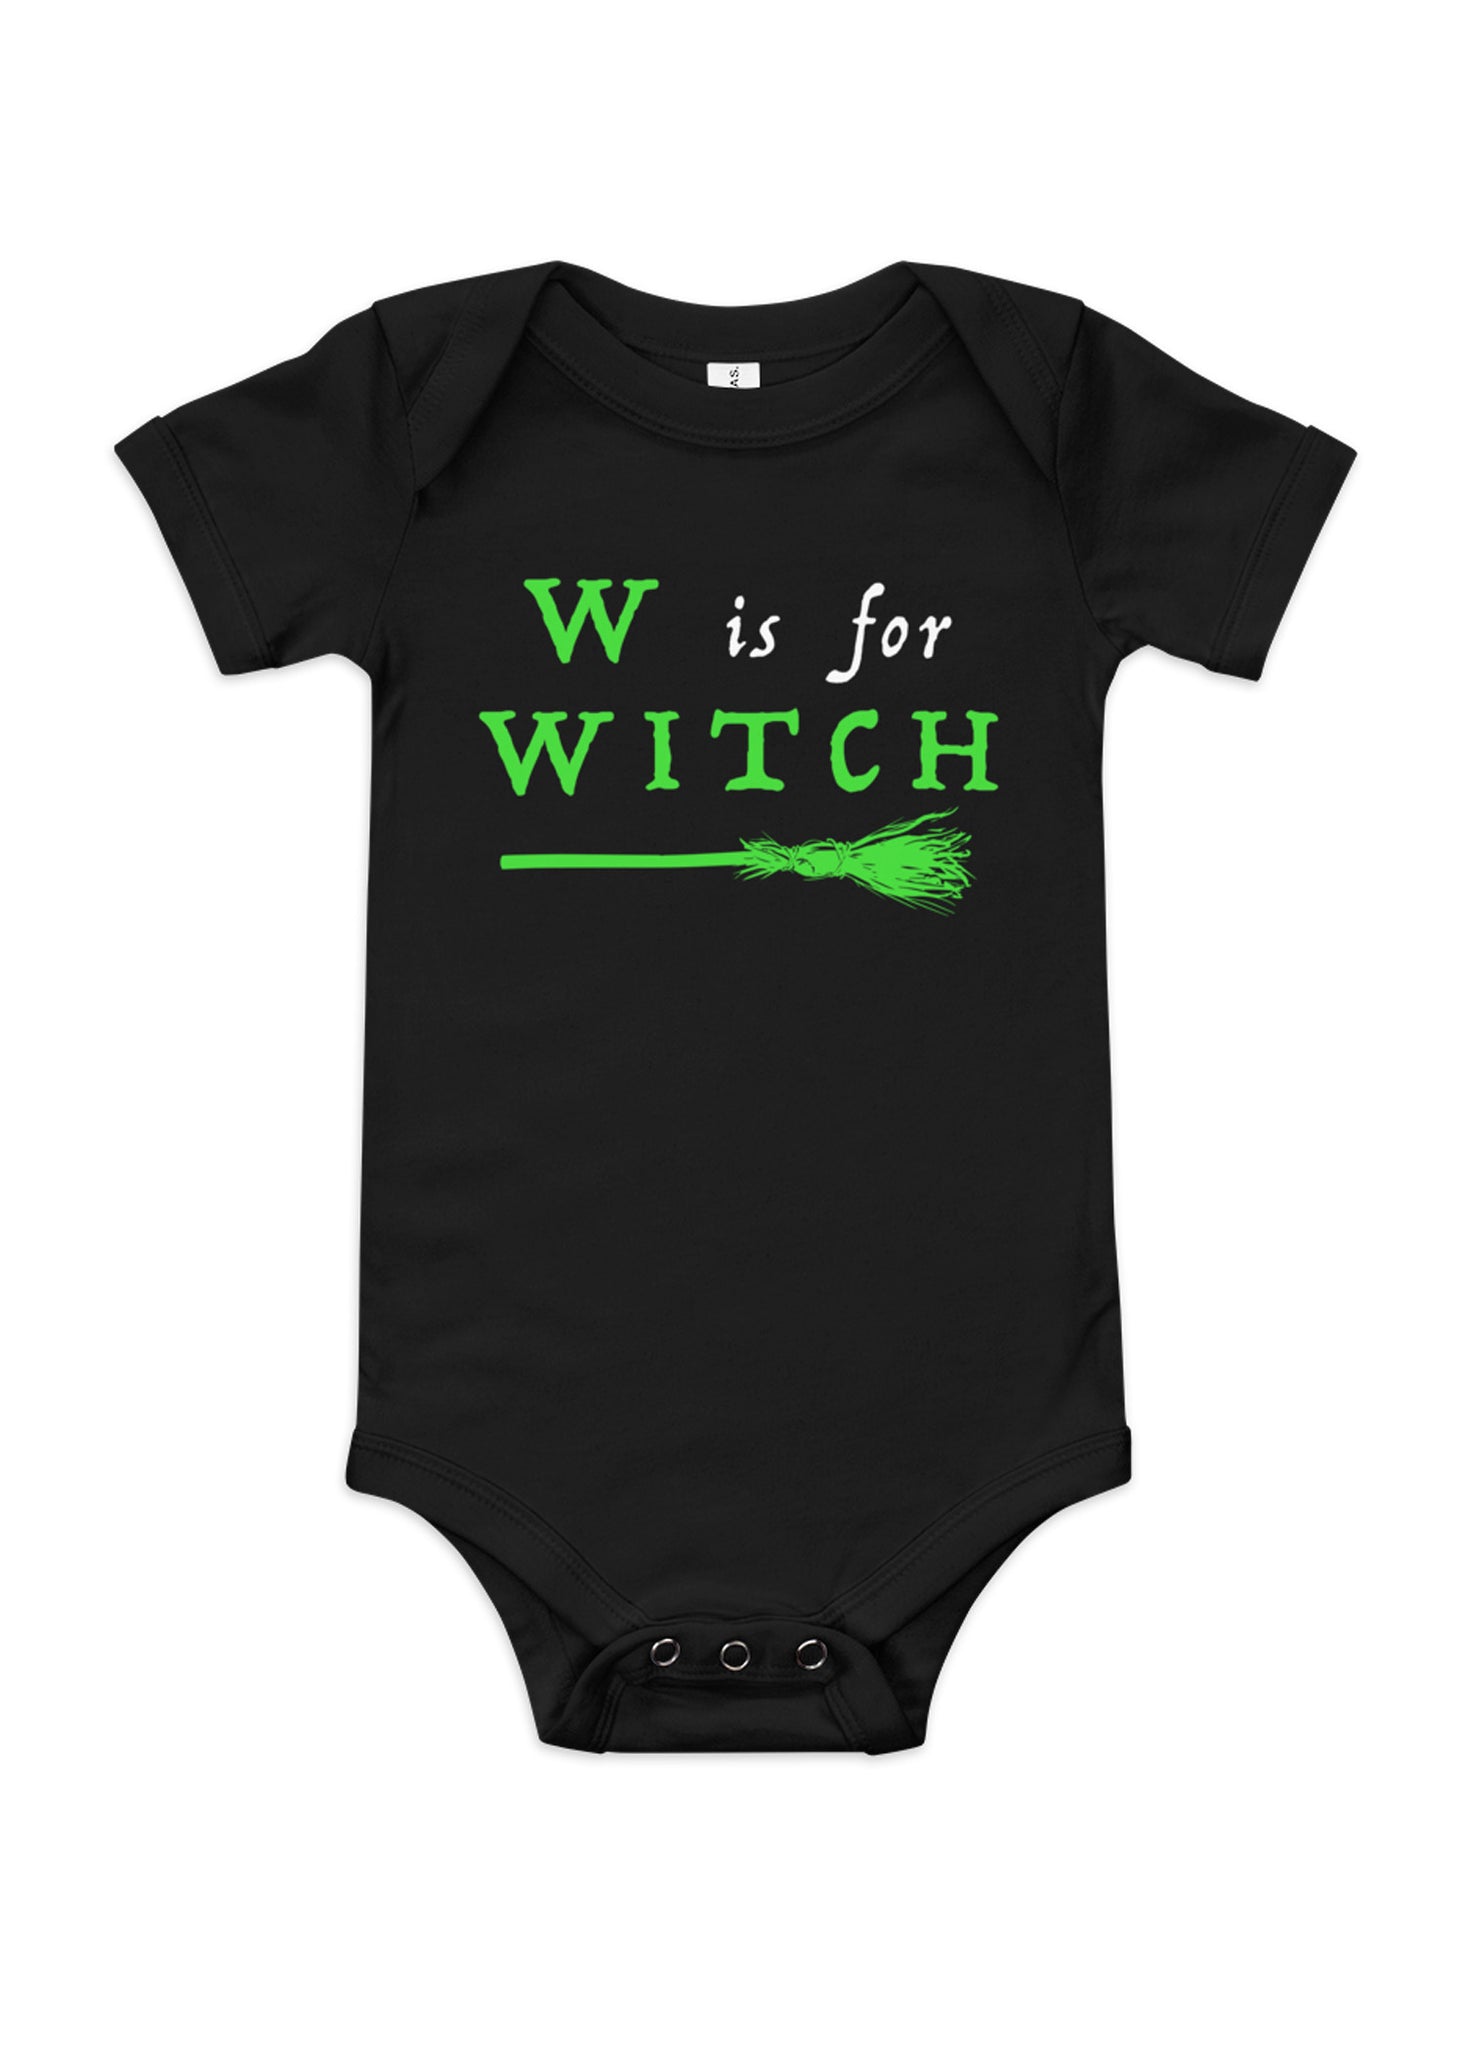 Baby "W is for Witch" ABCs Bodysuit in Black